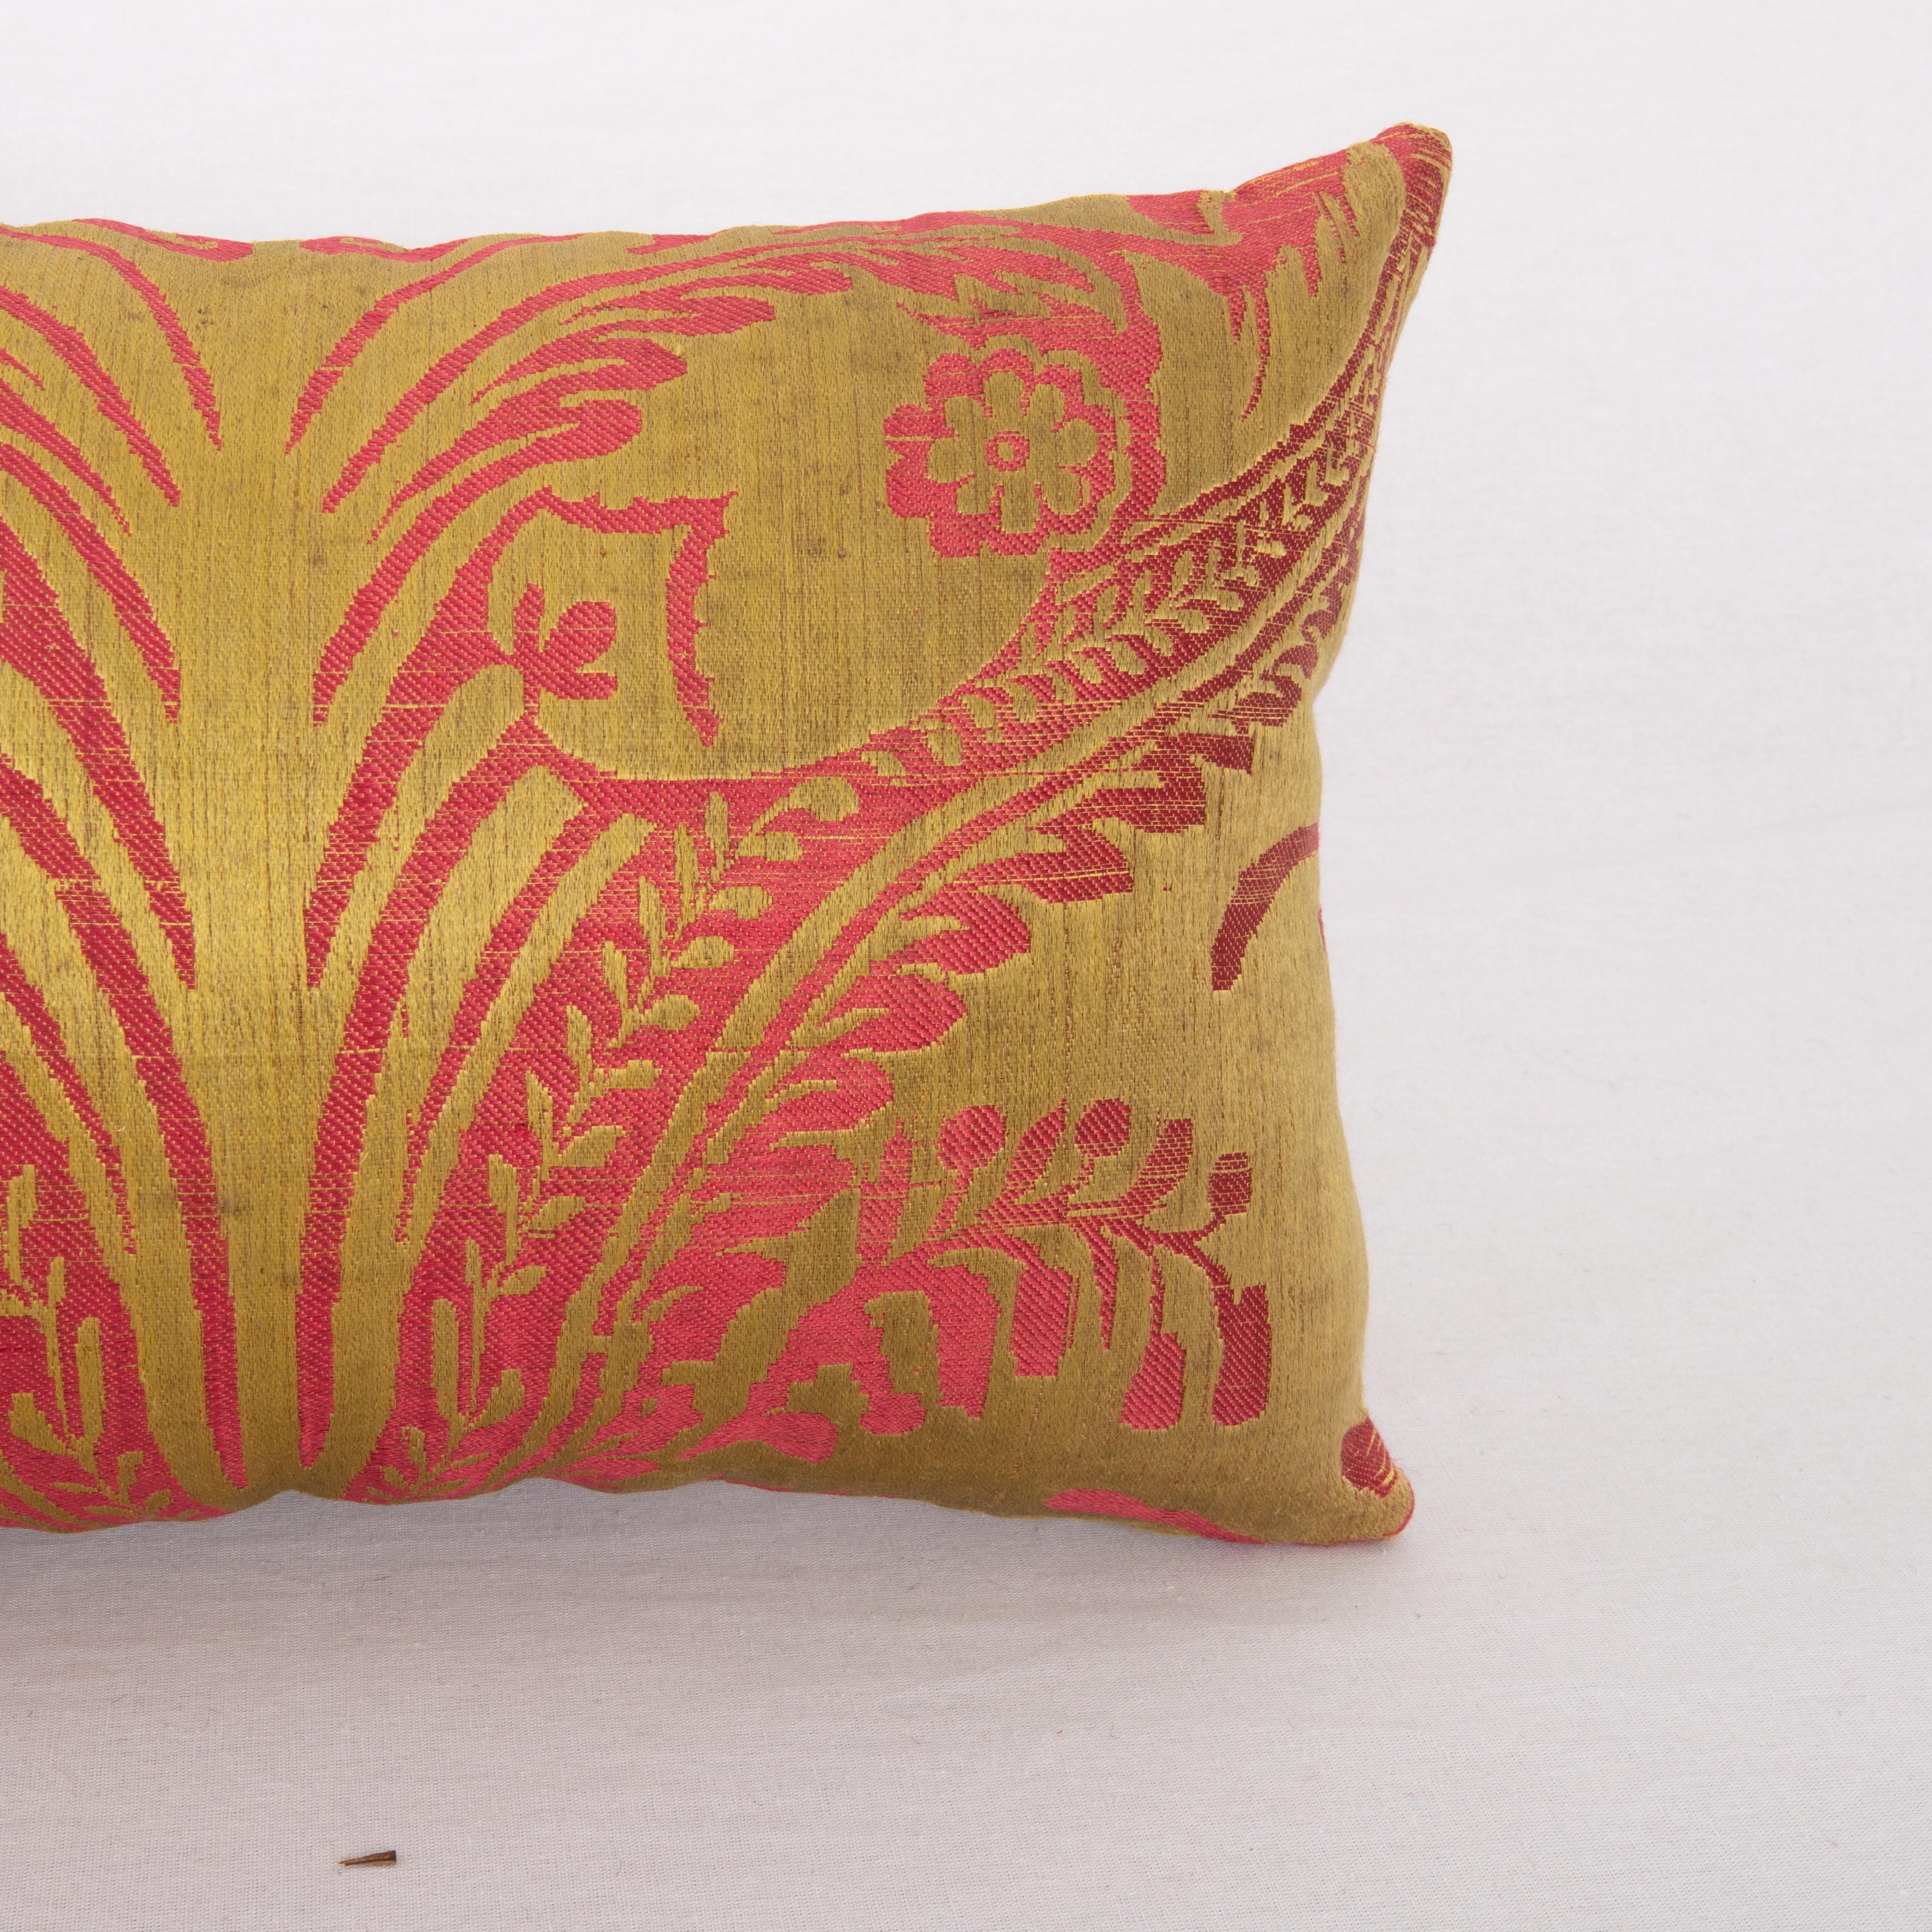 Hand-Woven Kidney Pillow Case Made from an Antique Italian Textile For Sale